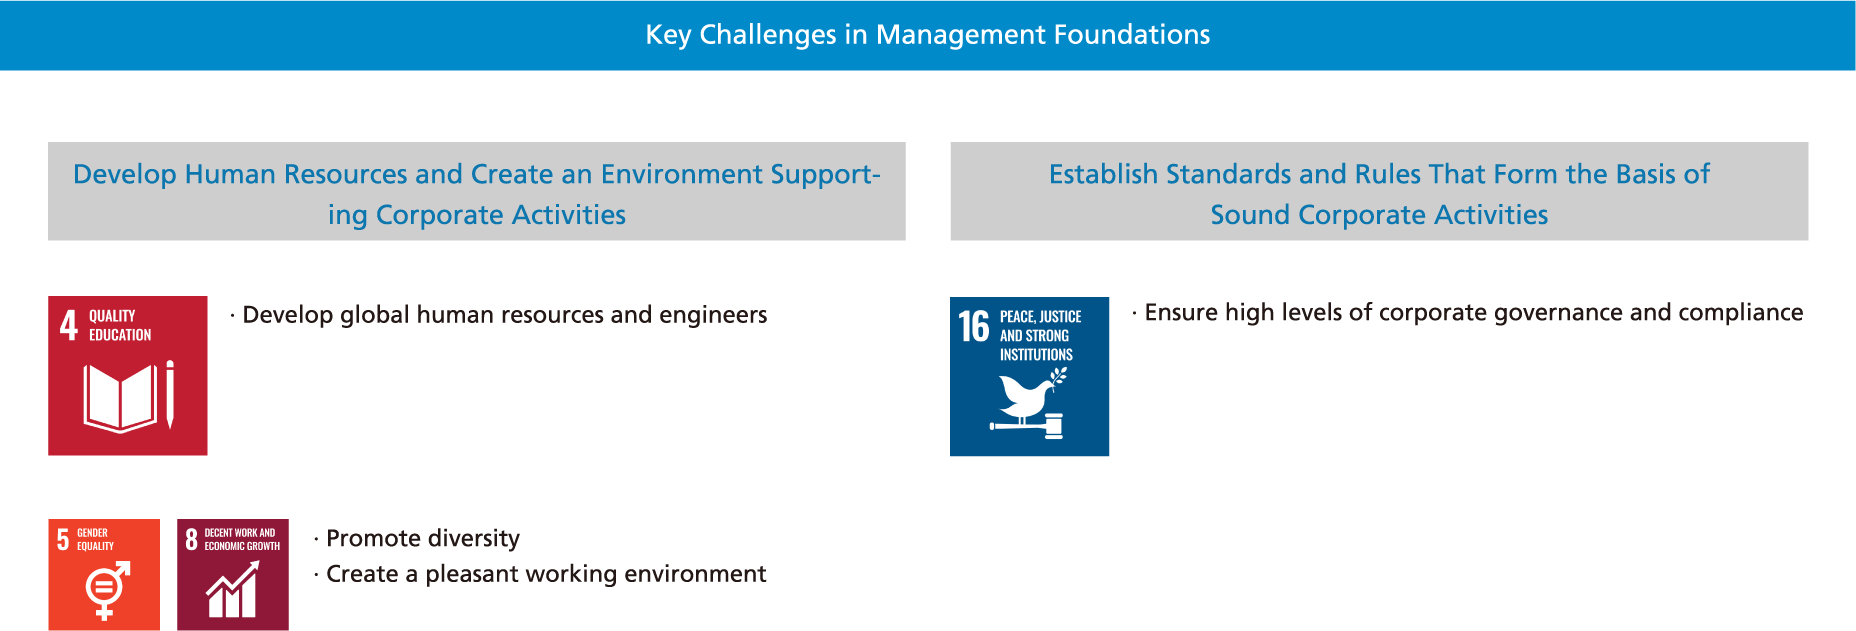 Key Challenges in Management Foundations